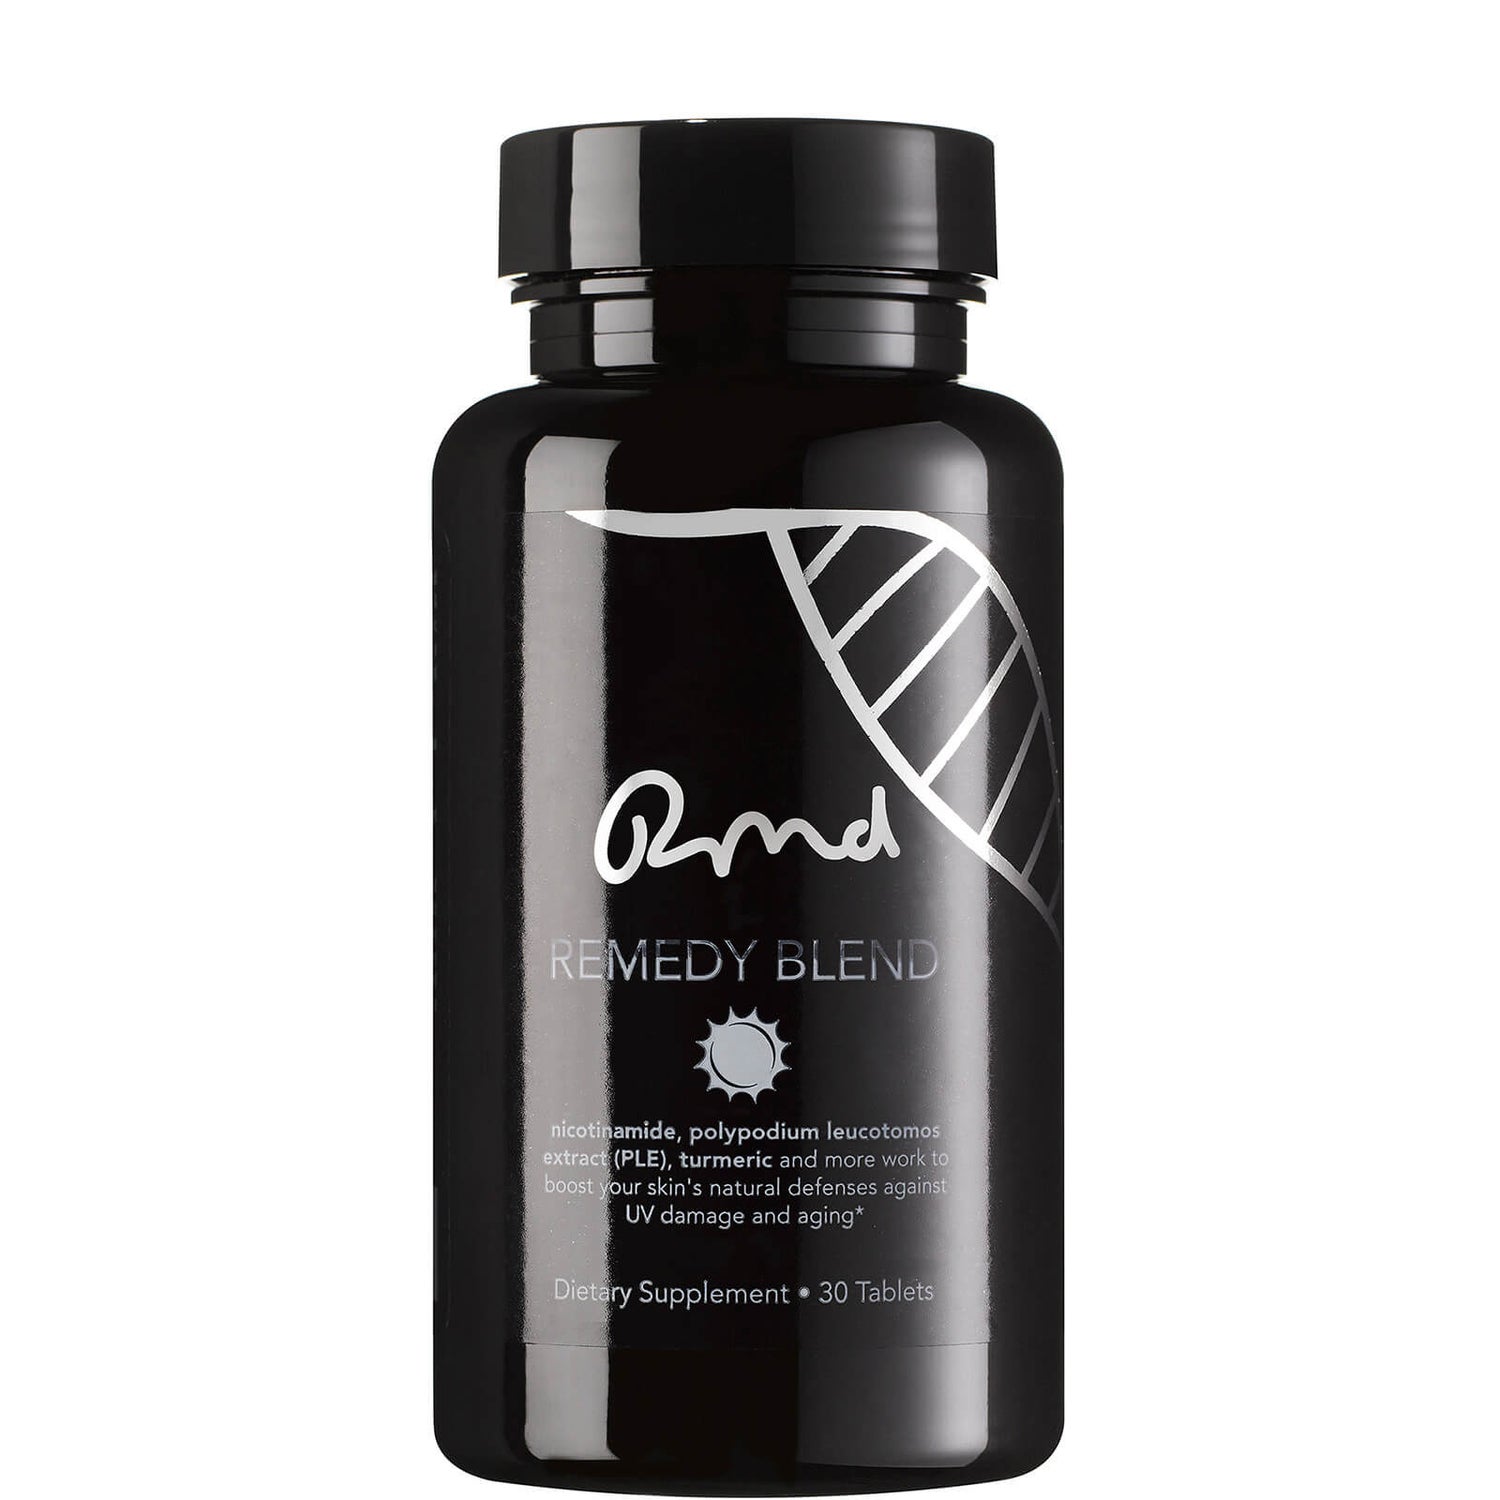 DNA Renewal The Remedy Blend